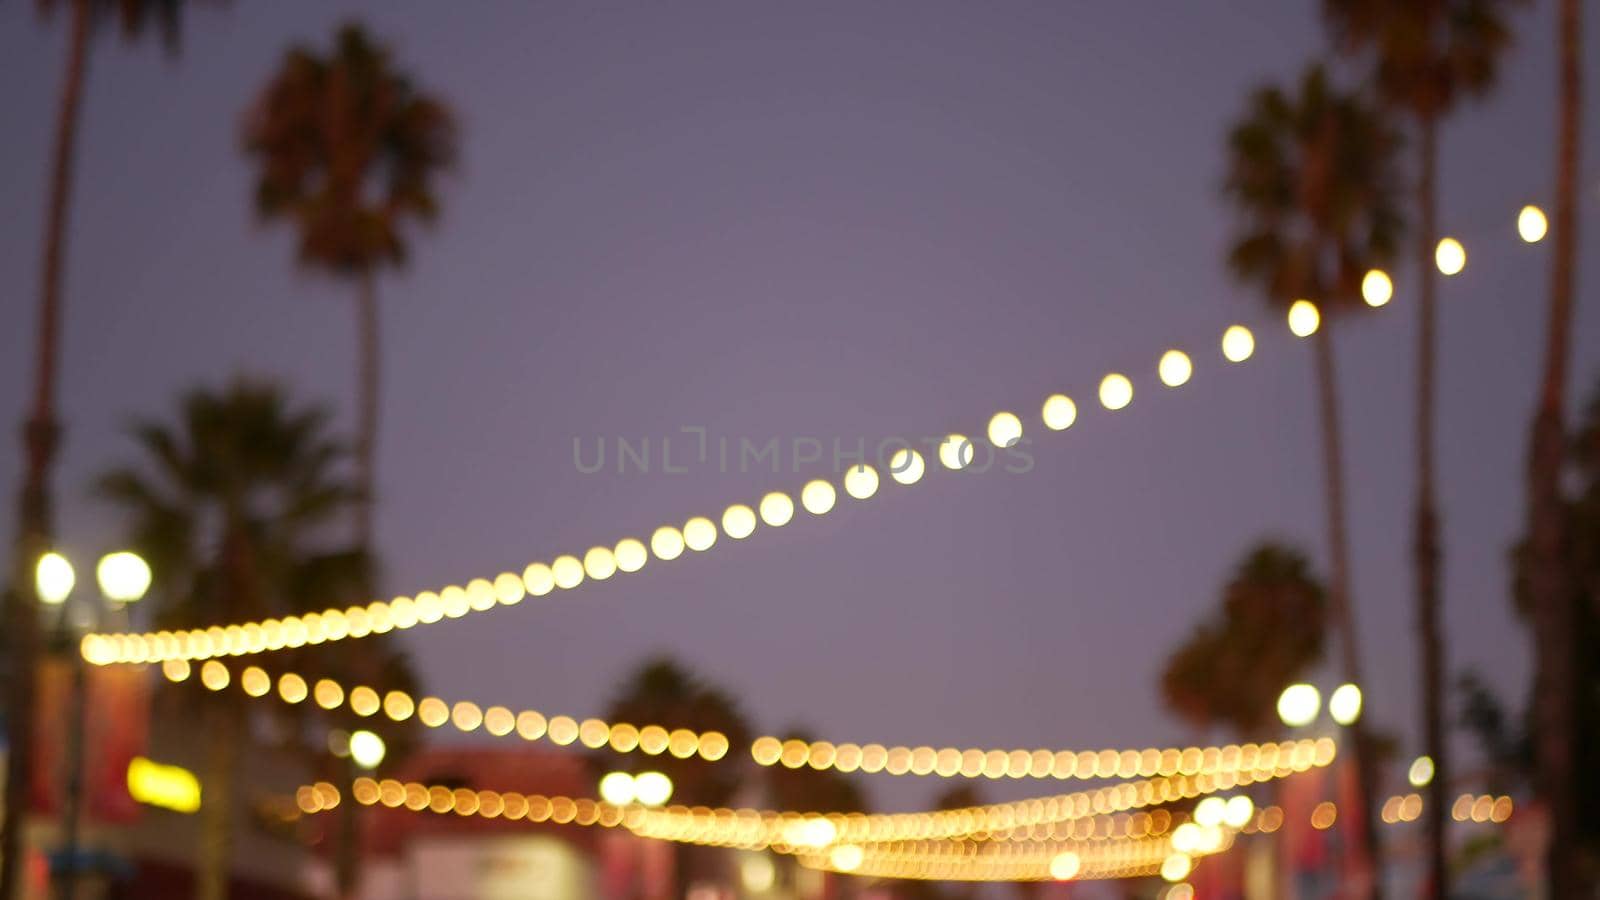 Decorative staring garland lights, palm trees silhouettes, evening sky. Blurred Background. Street decorated with lamps in California. Festive illuminations, beach party, tropical vacations concept